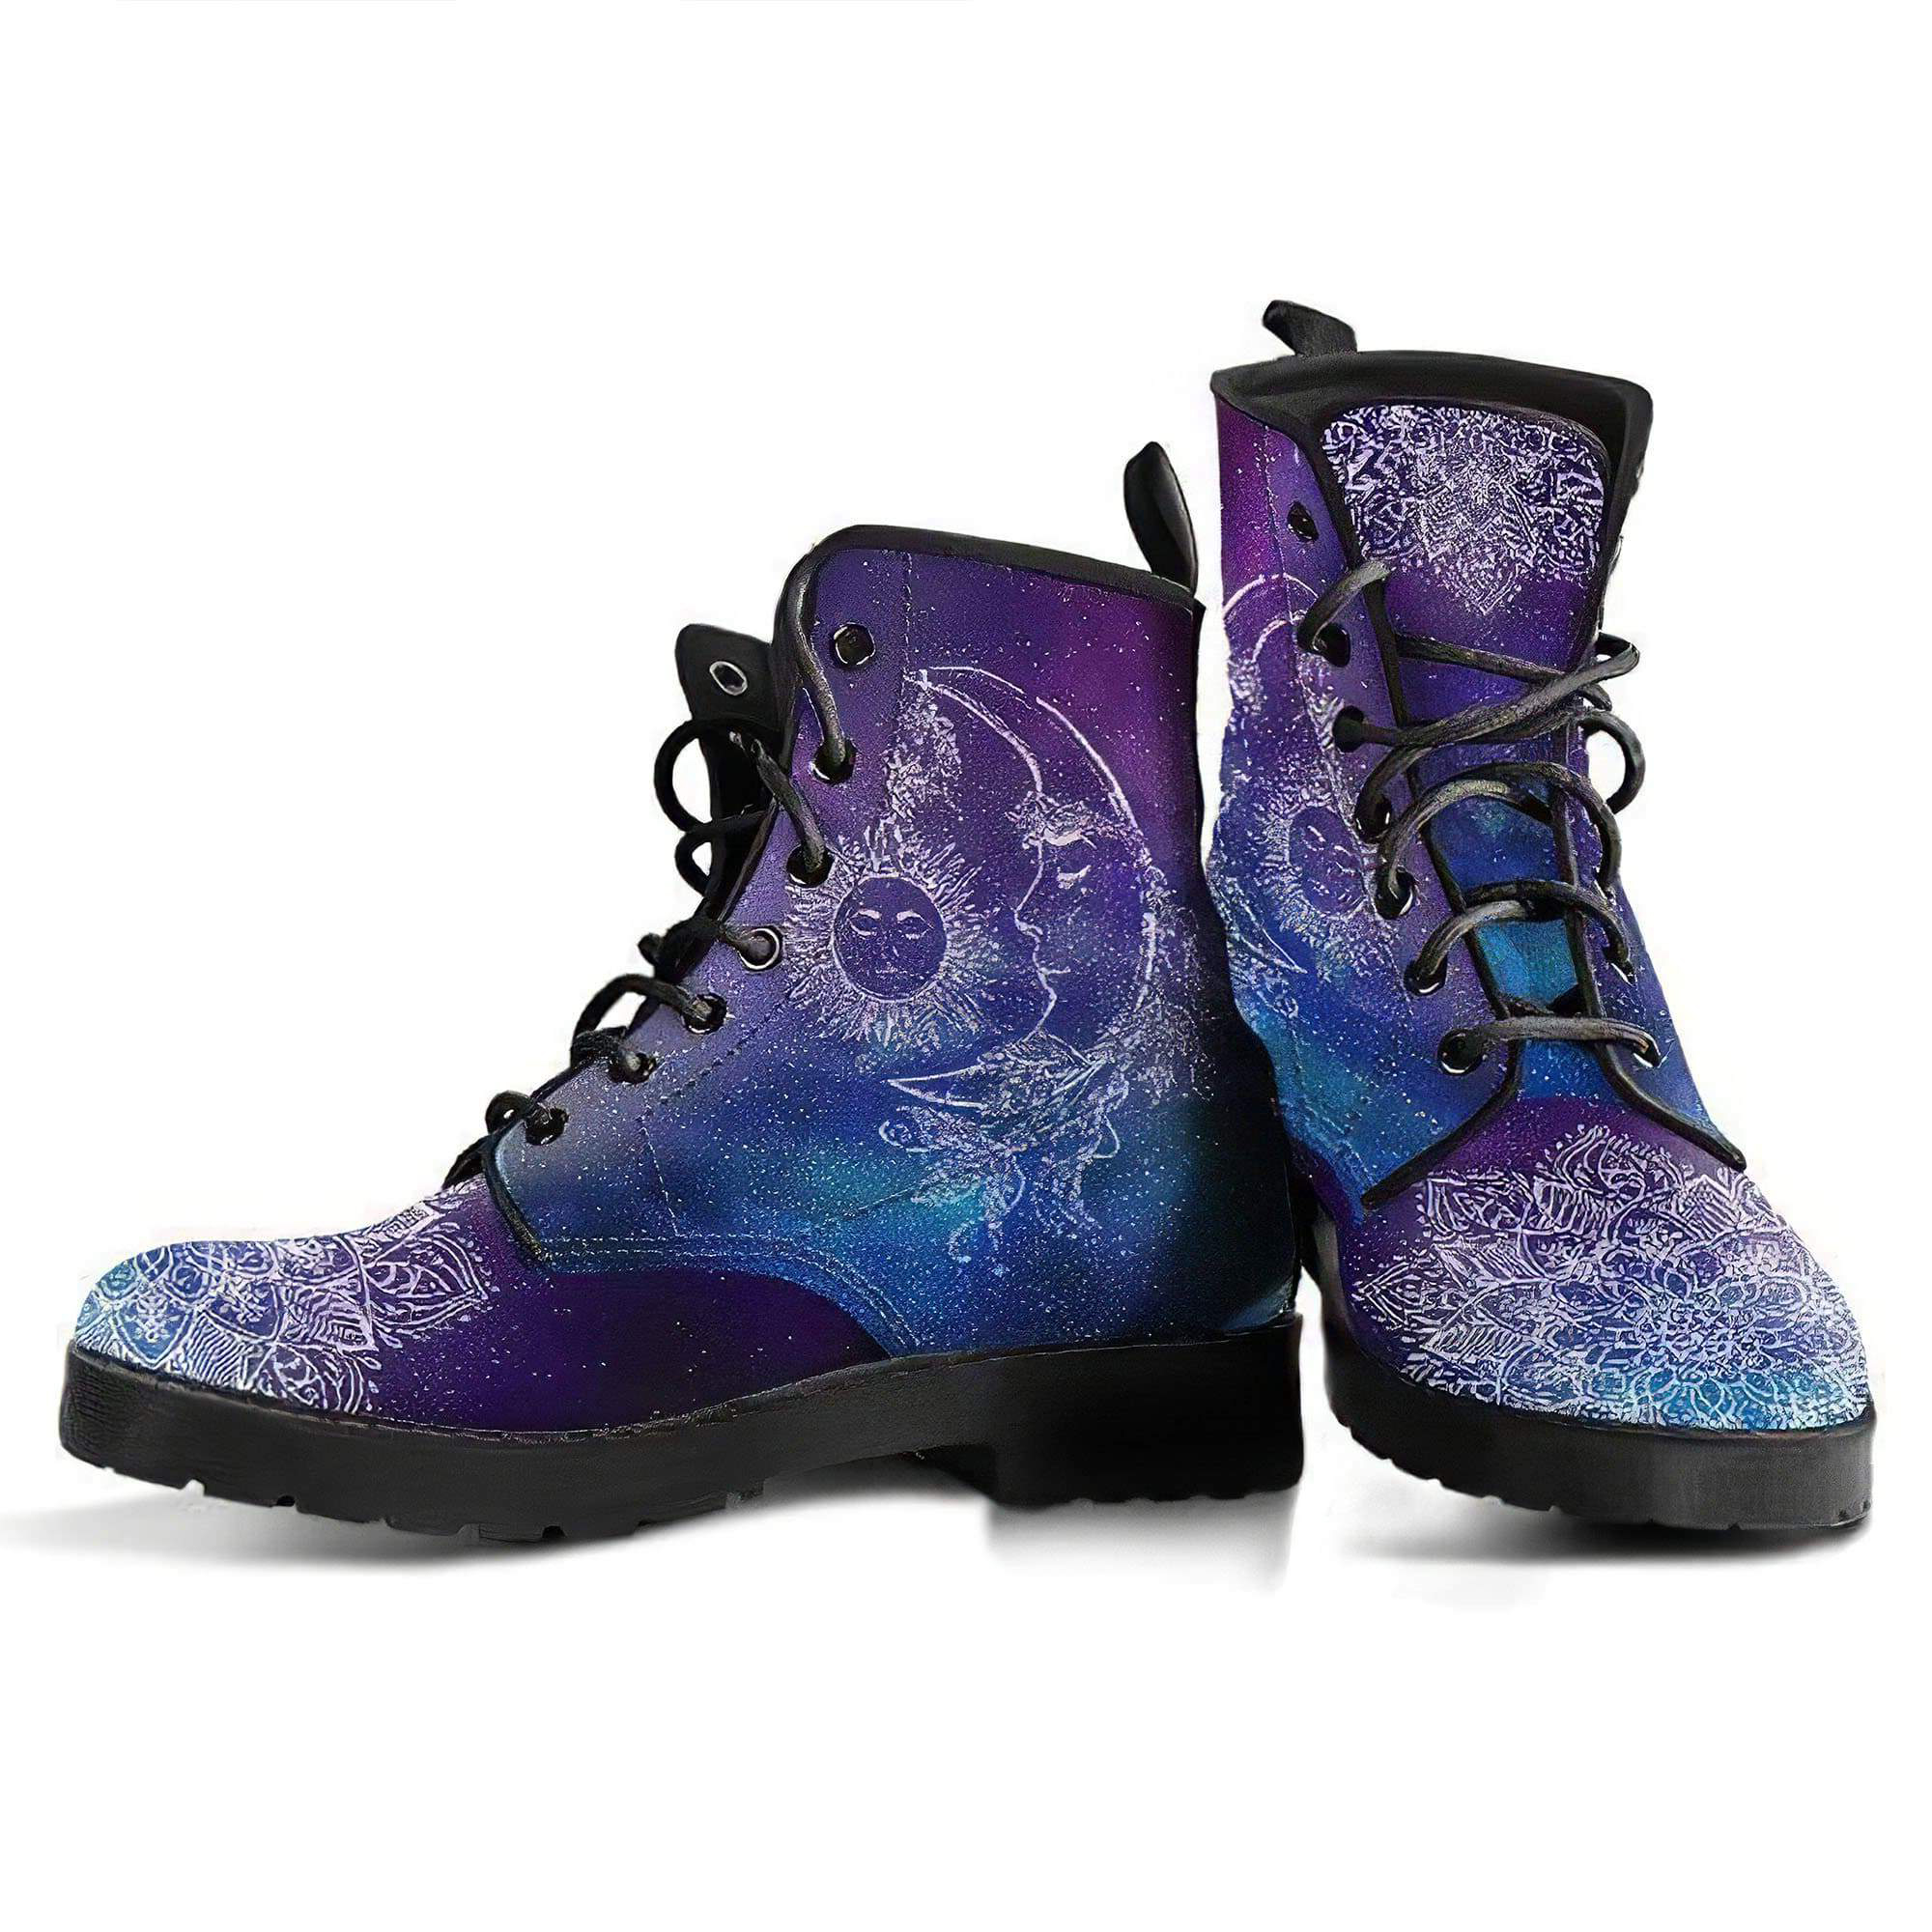 sun-and-moon-galaxy-handcrafted-boots-women-s-leather-boots-12051959152701.jpg